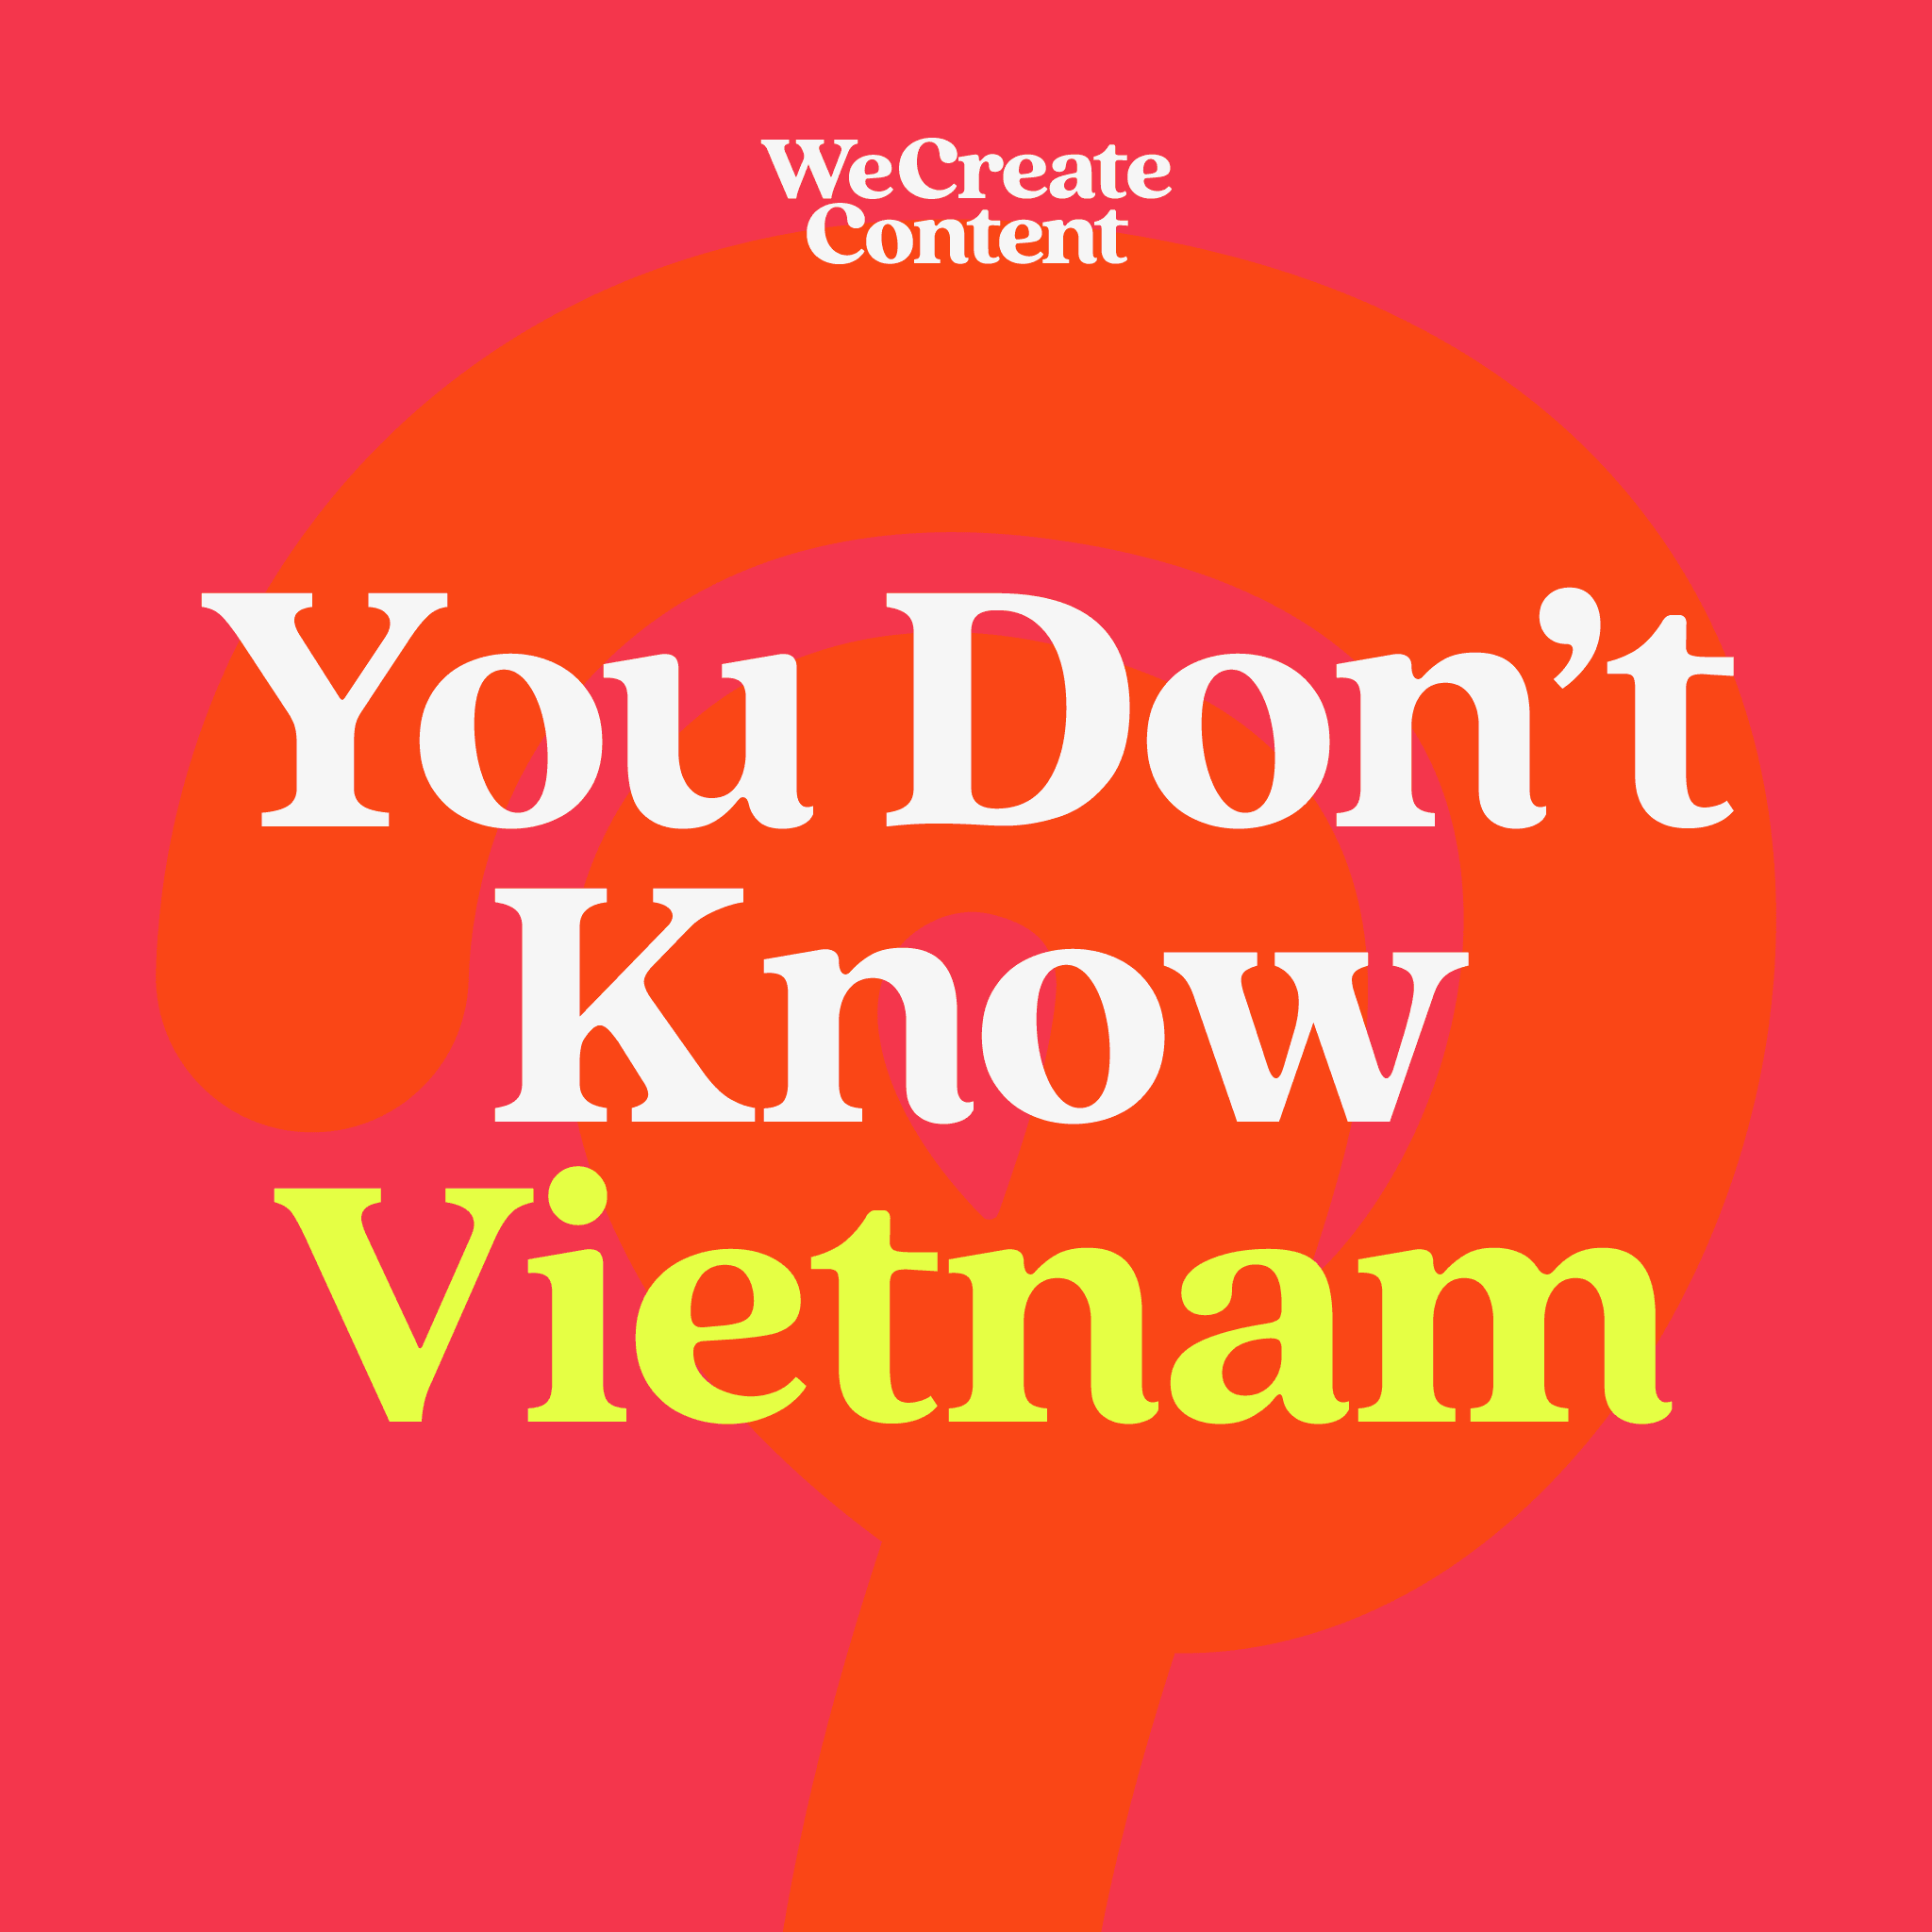 This is the cover art for We Create Content's podcast You Don't Know Vietnam